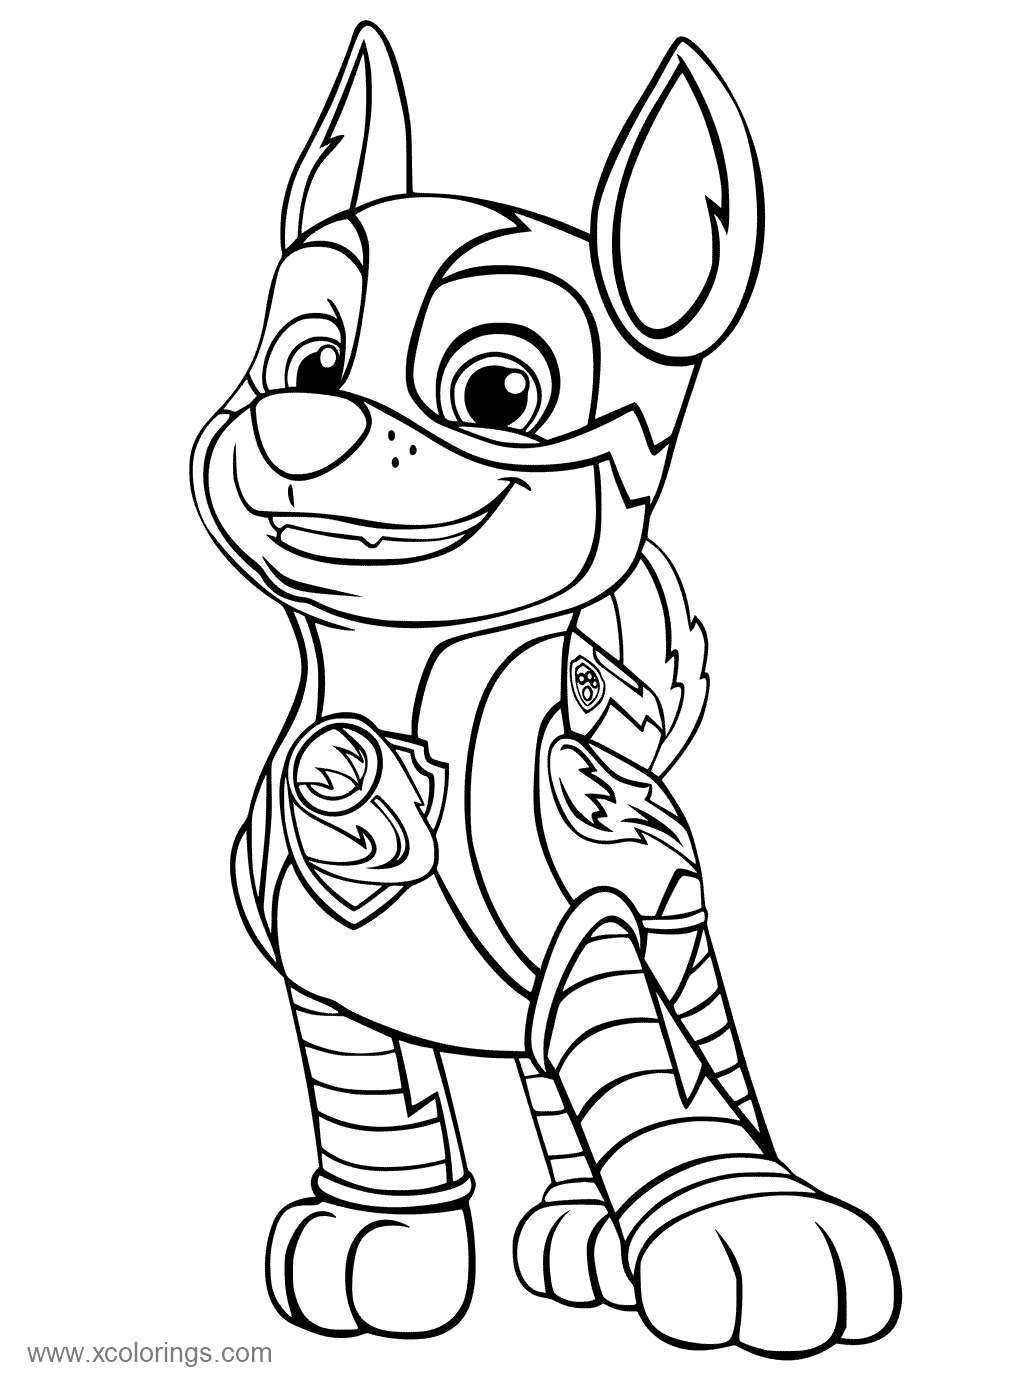 Super Pups Mighty Pups Chase Coloring Pages - XColorings.com